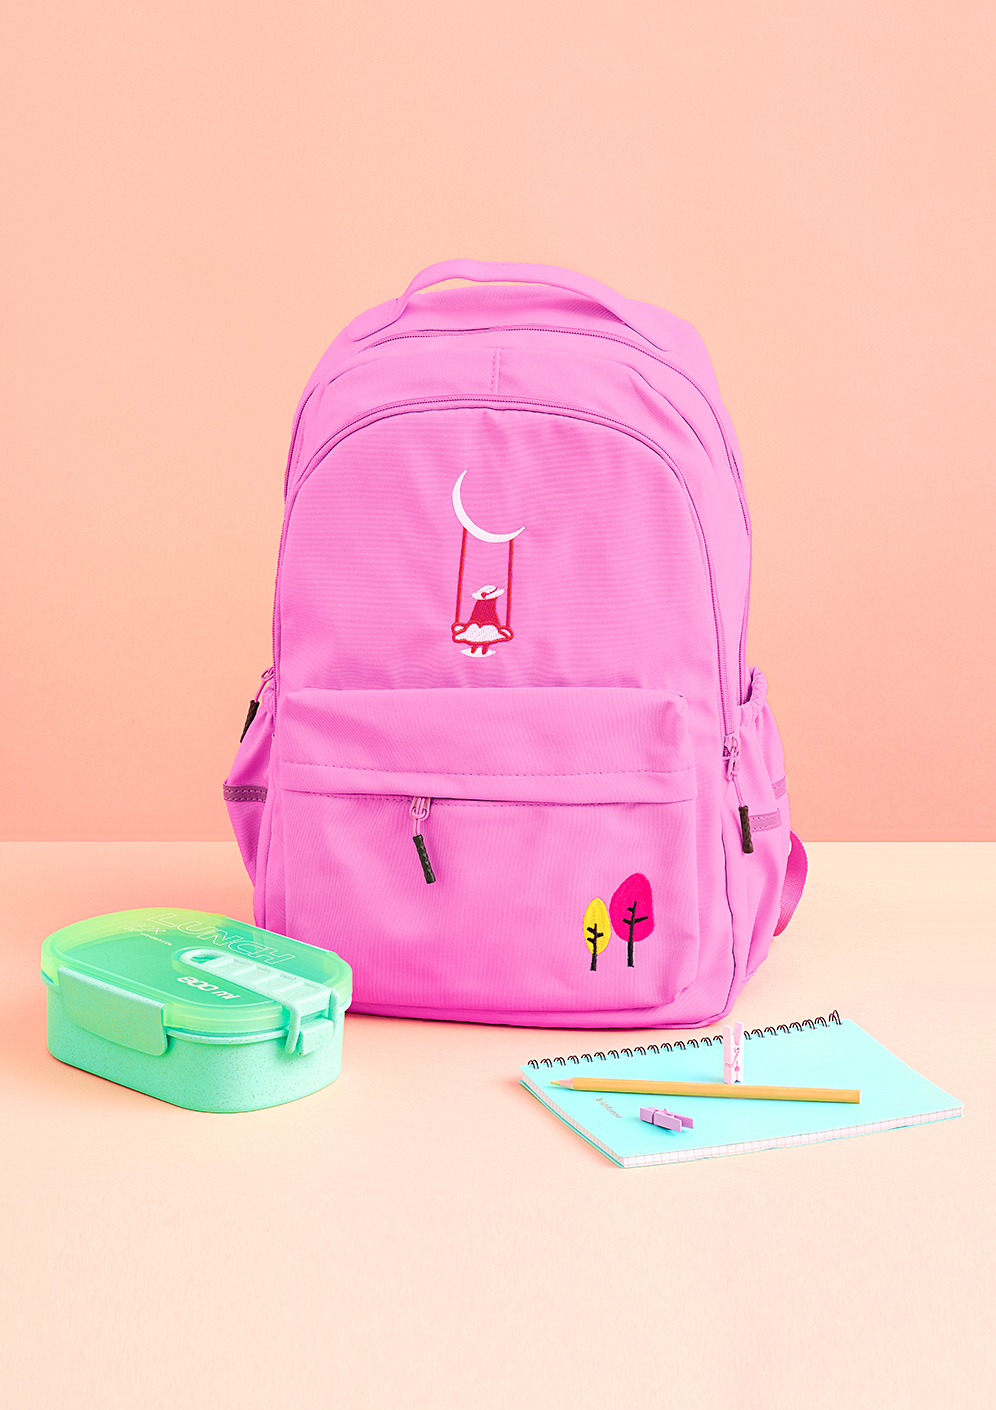 Putting together the perfect school backpack!